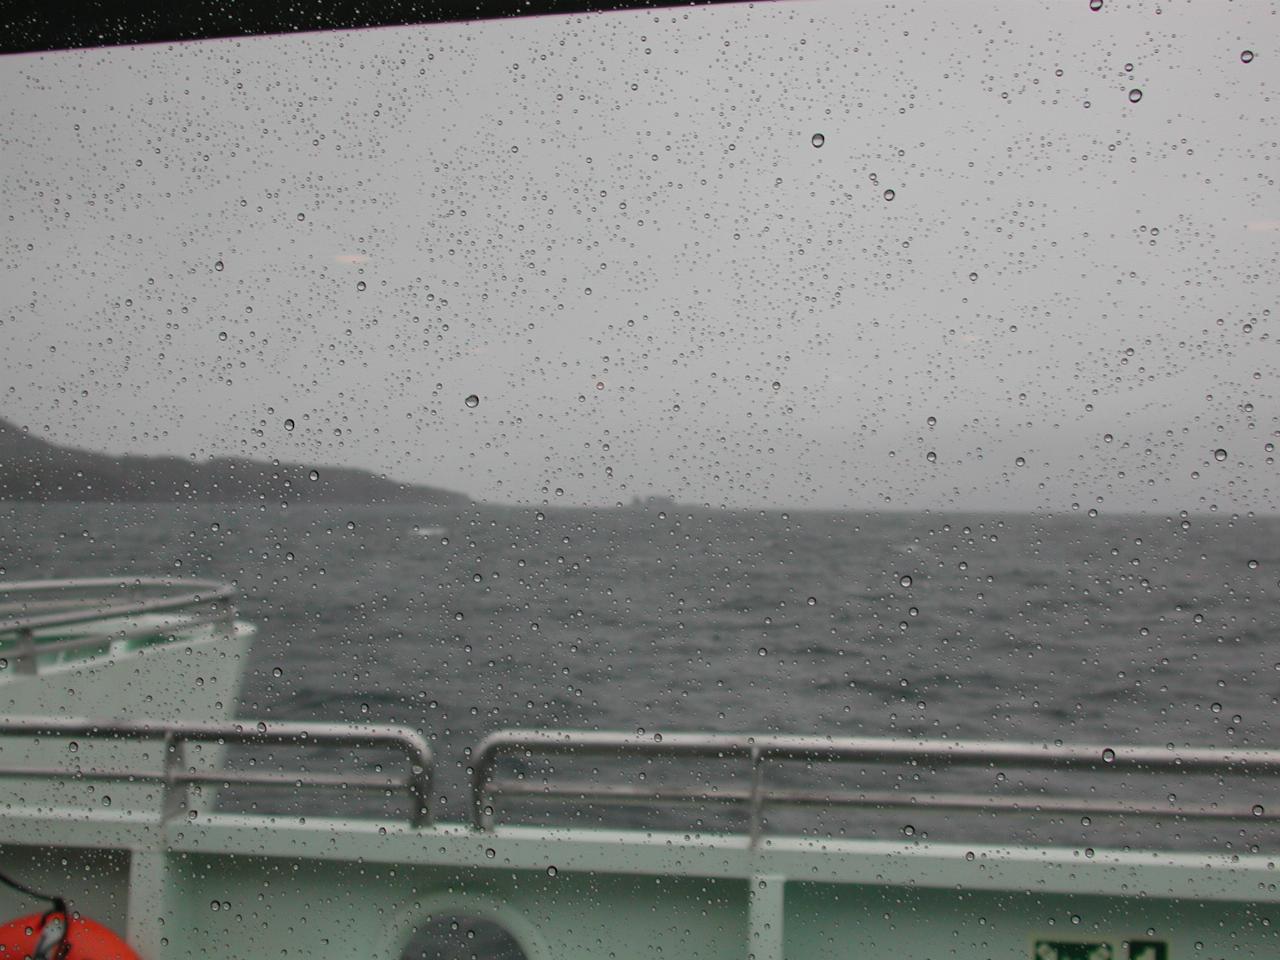 Northern tip of Dundas Island, as we reach open waters of Dixon Entrance